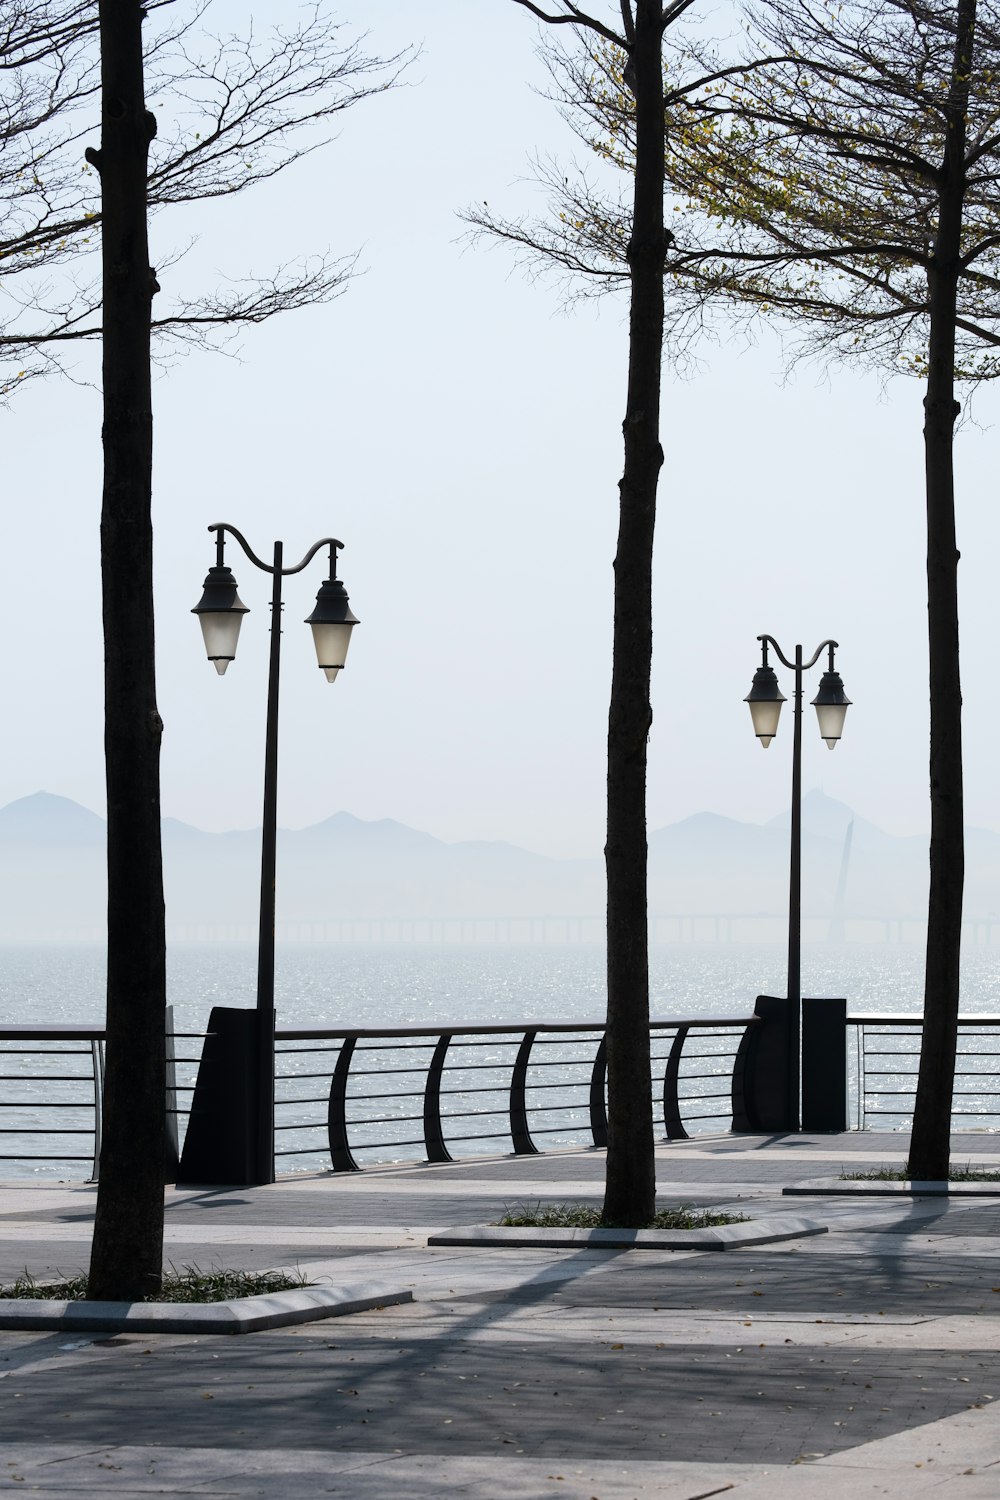 a couple of street lamps sitting next to a body of water